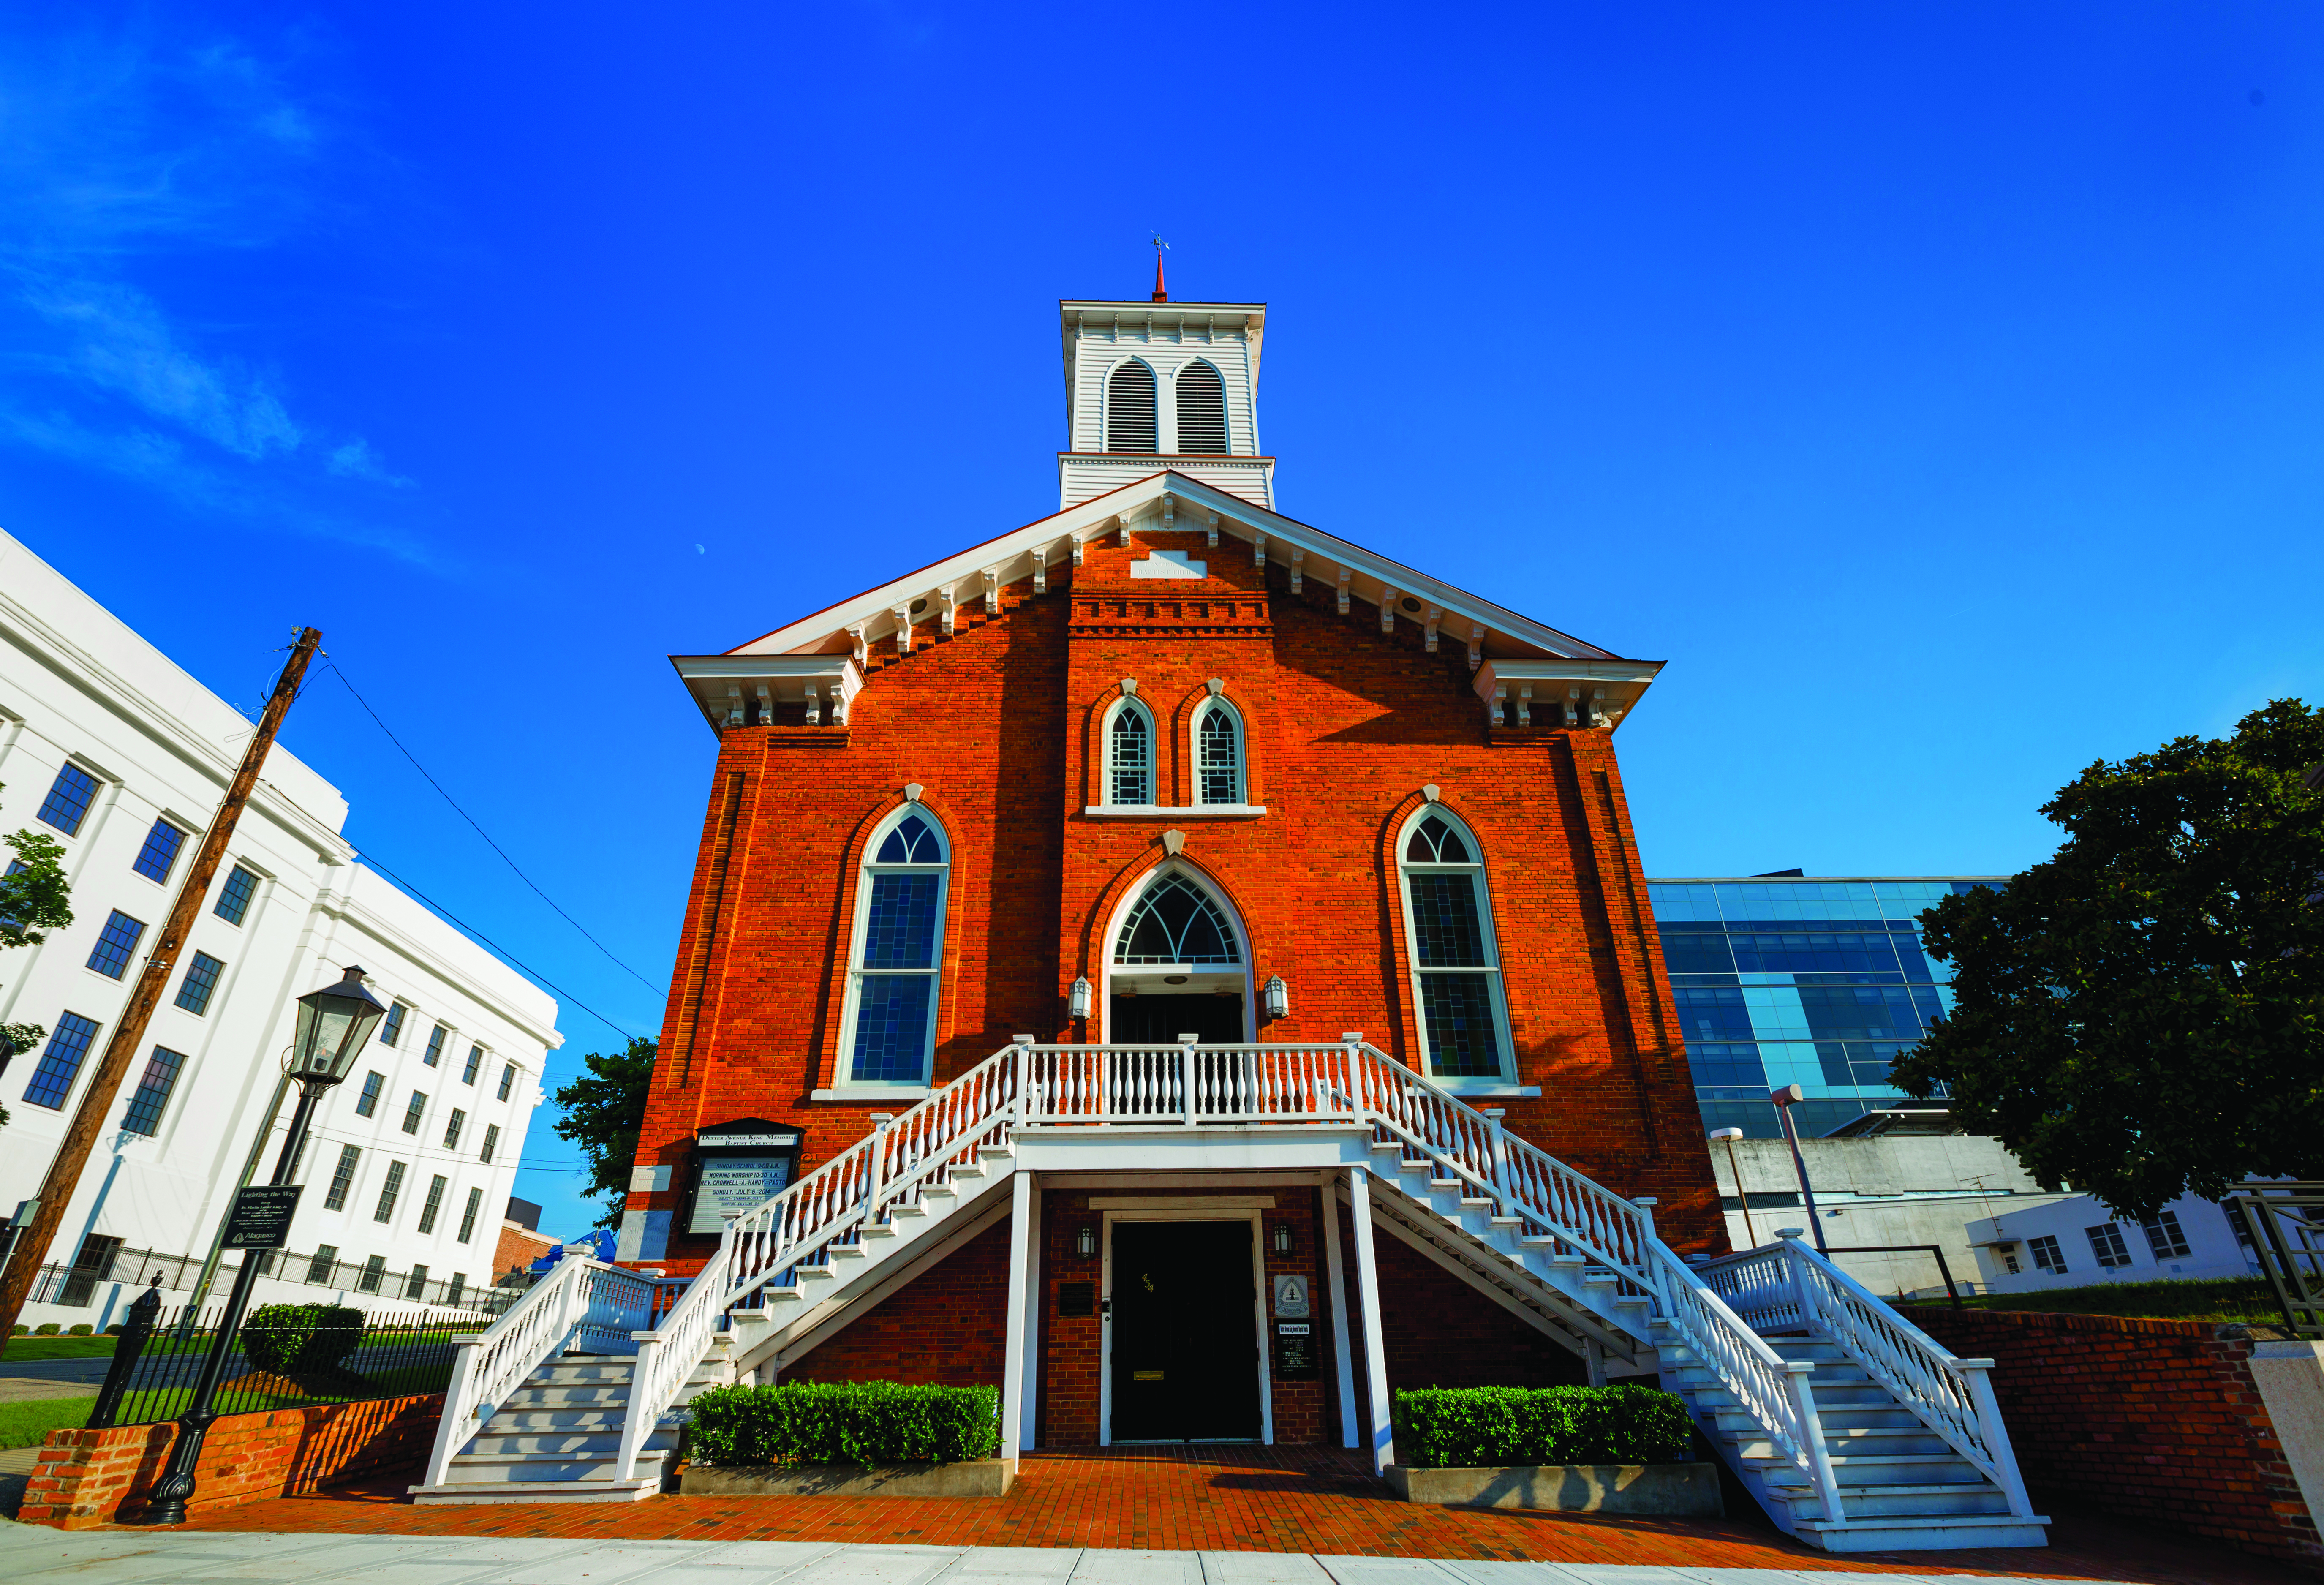 Outside street view of The Dexter Avenue King Memorial Baptist Church